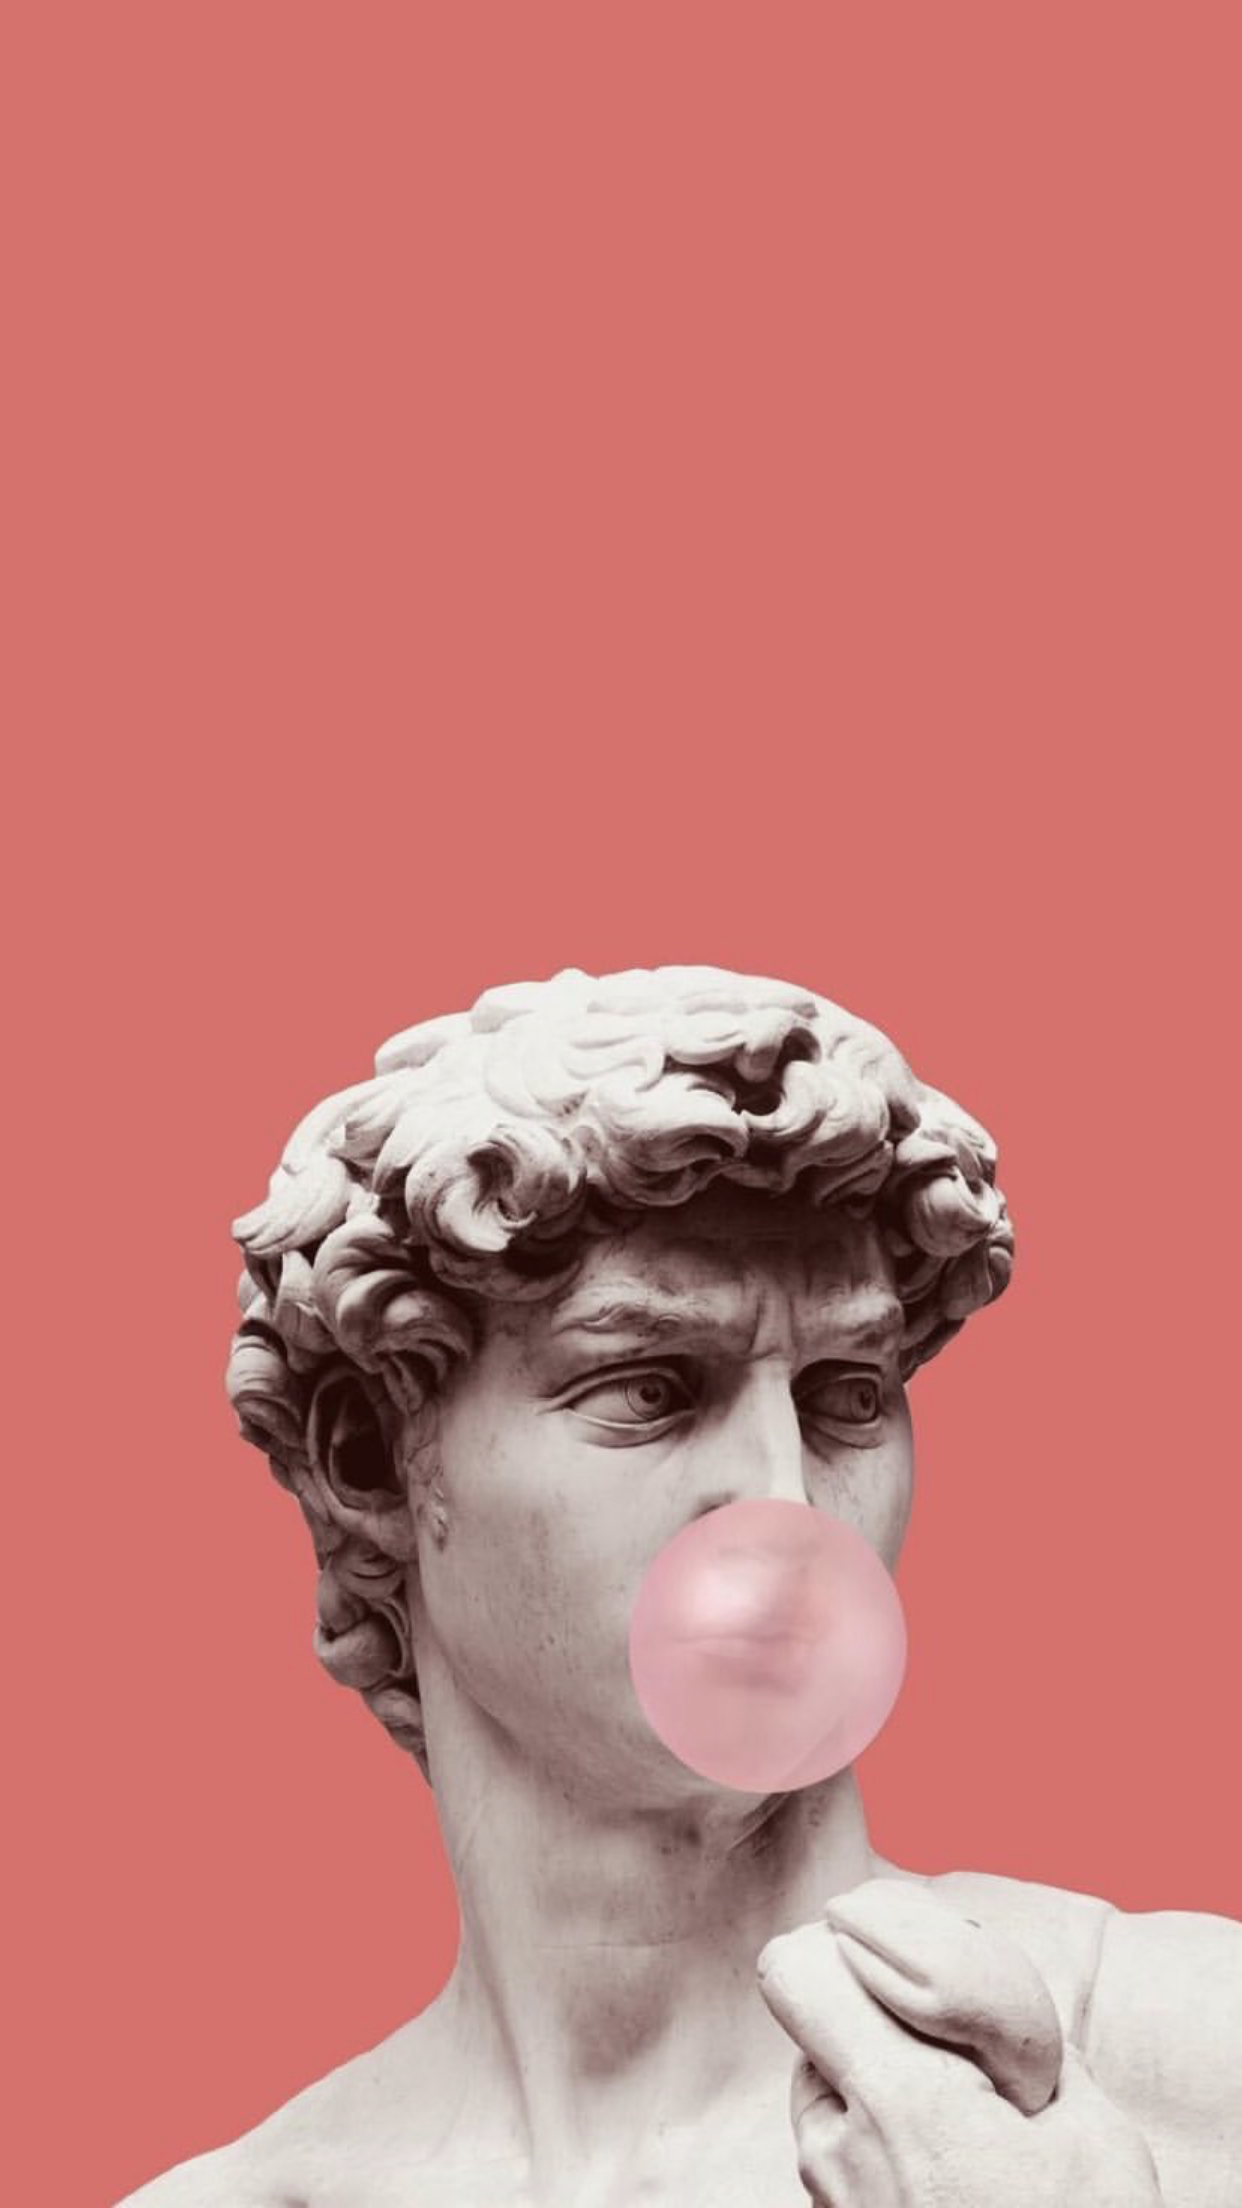 Buy David Statue Iphone Wallpaper Aesthetic Iphone Background Online in  India  Etsy